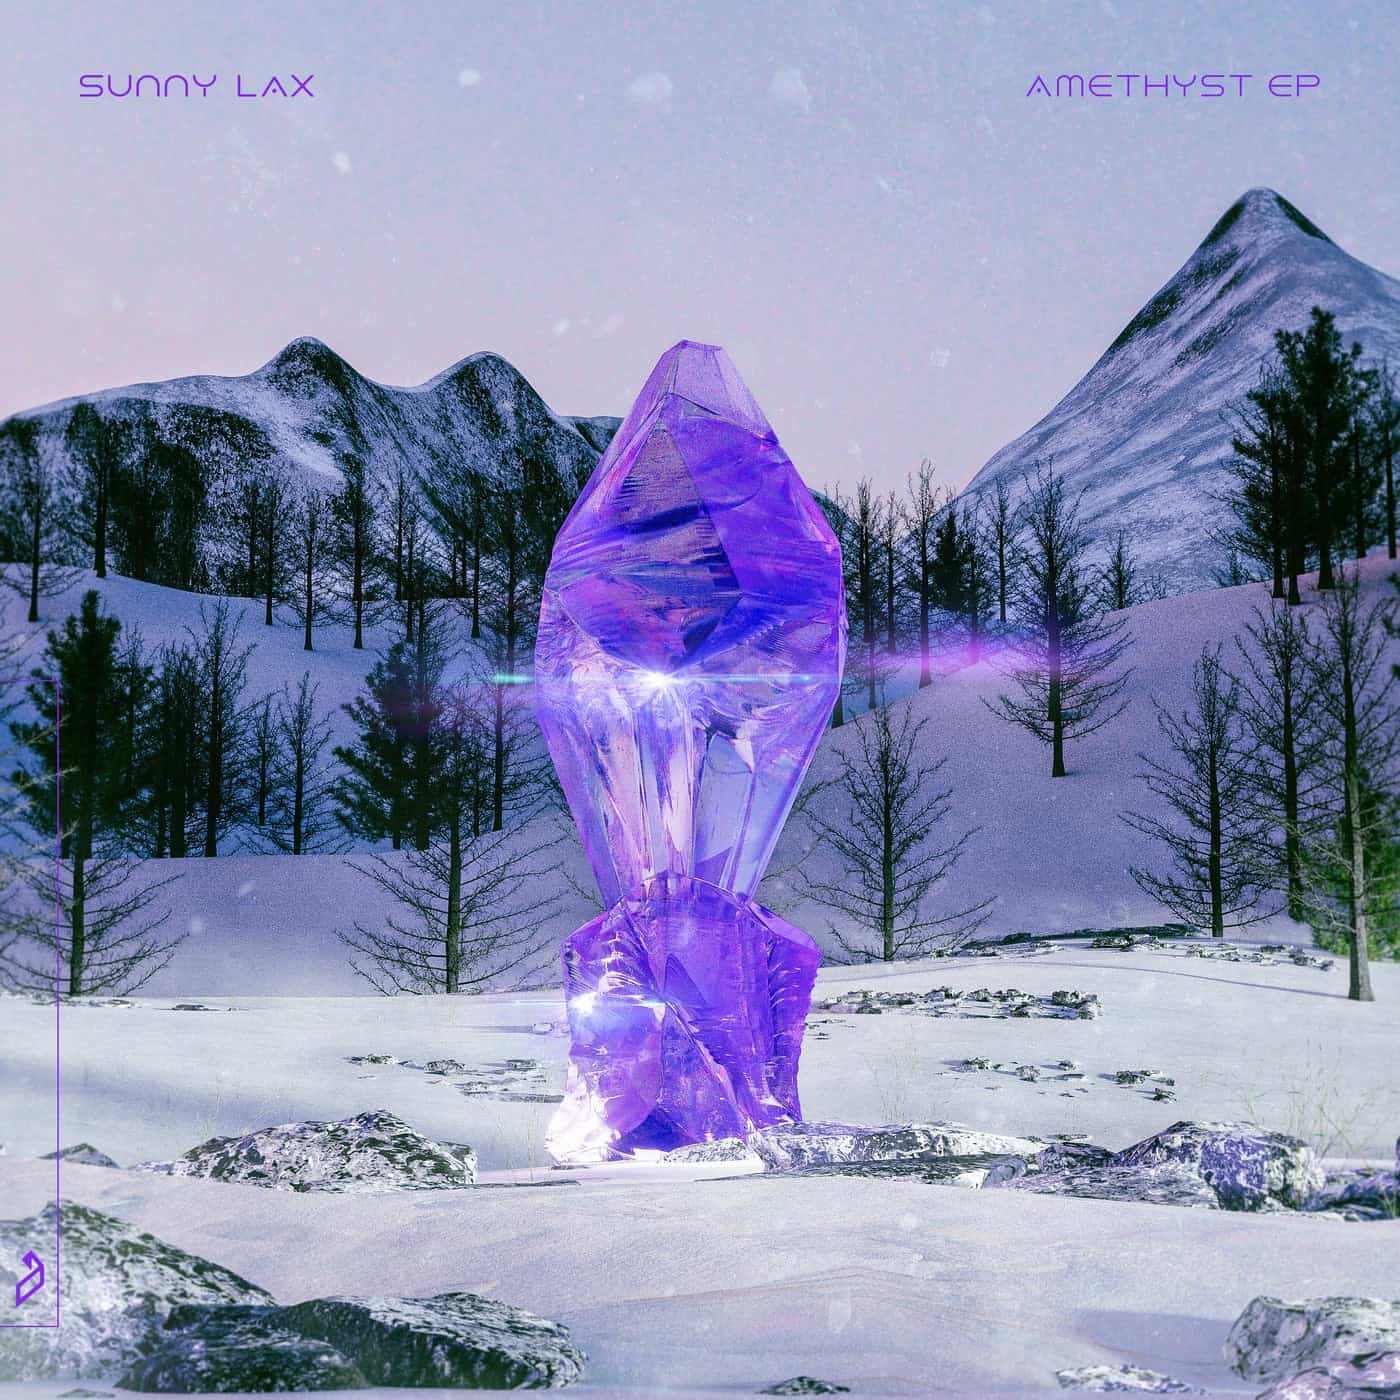 Download Amethyst EP on Electrobuzz